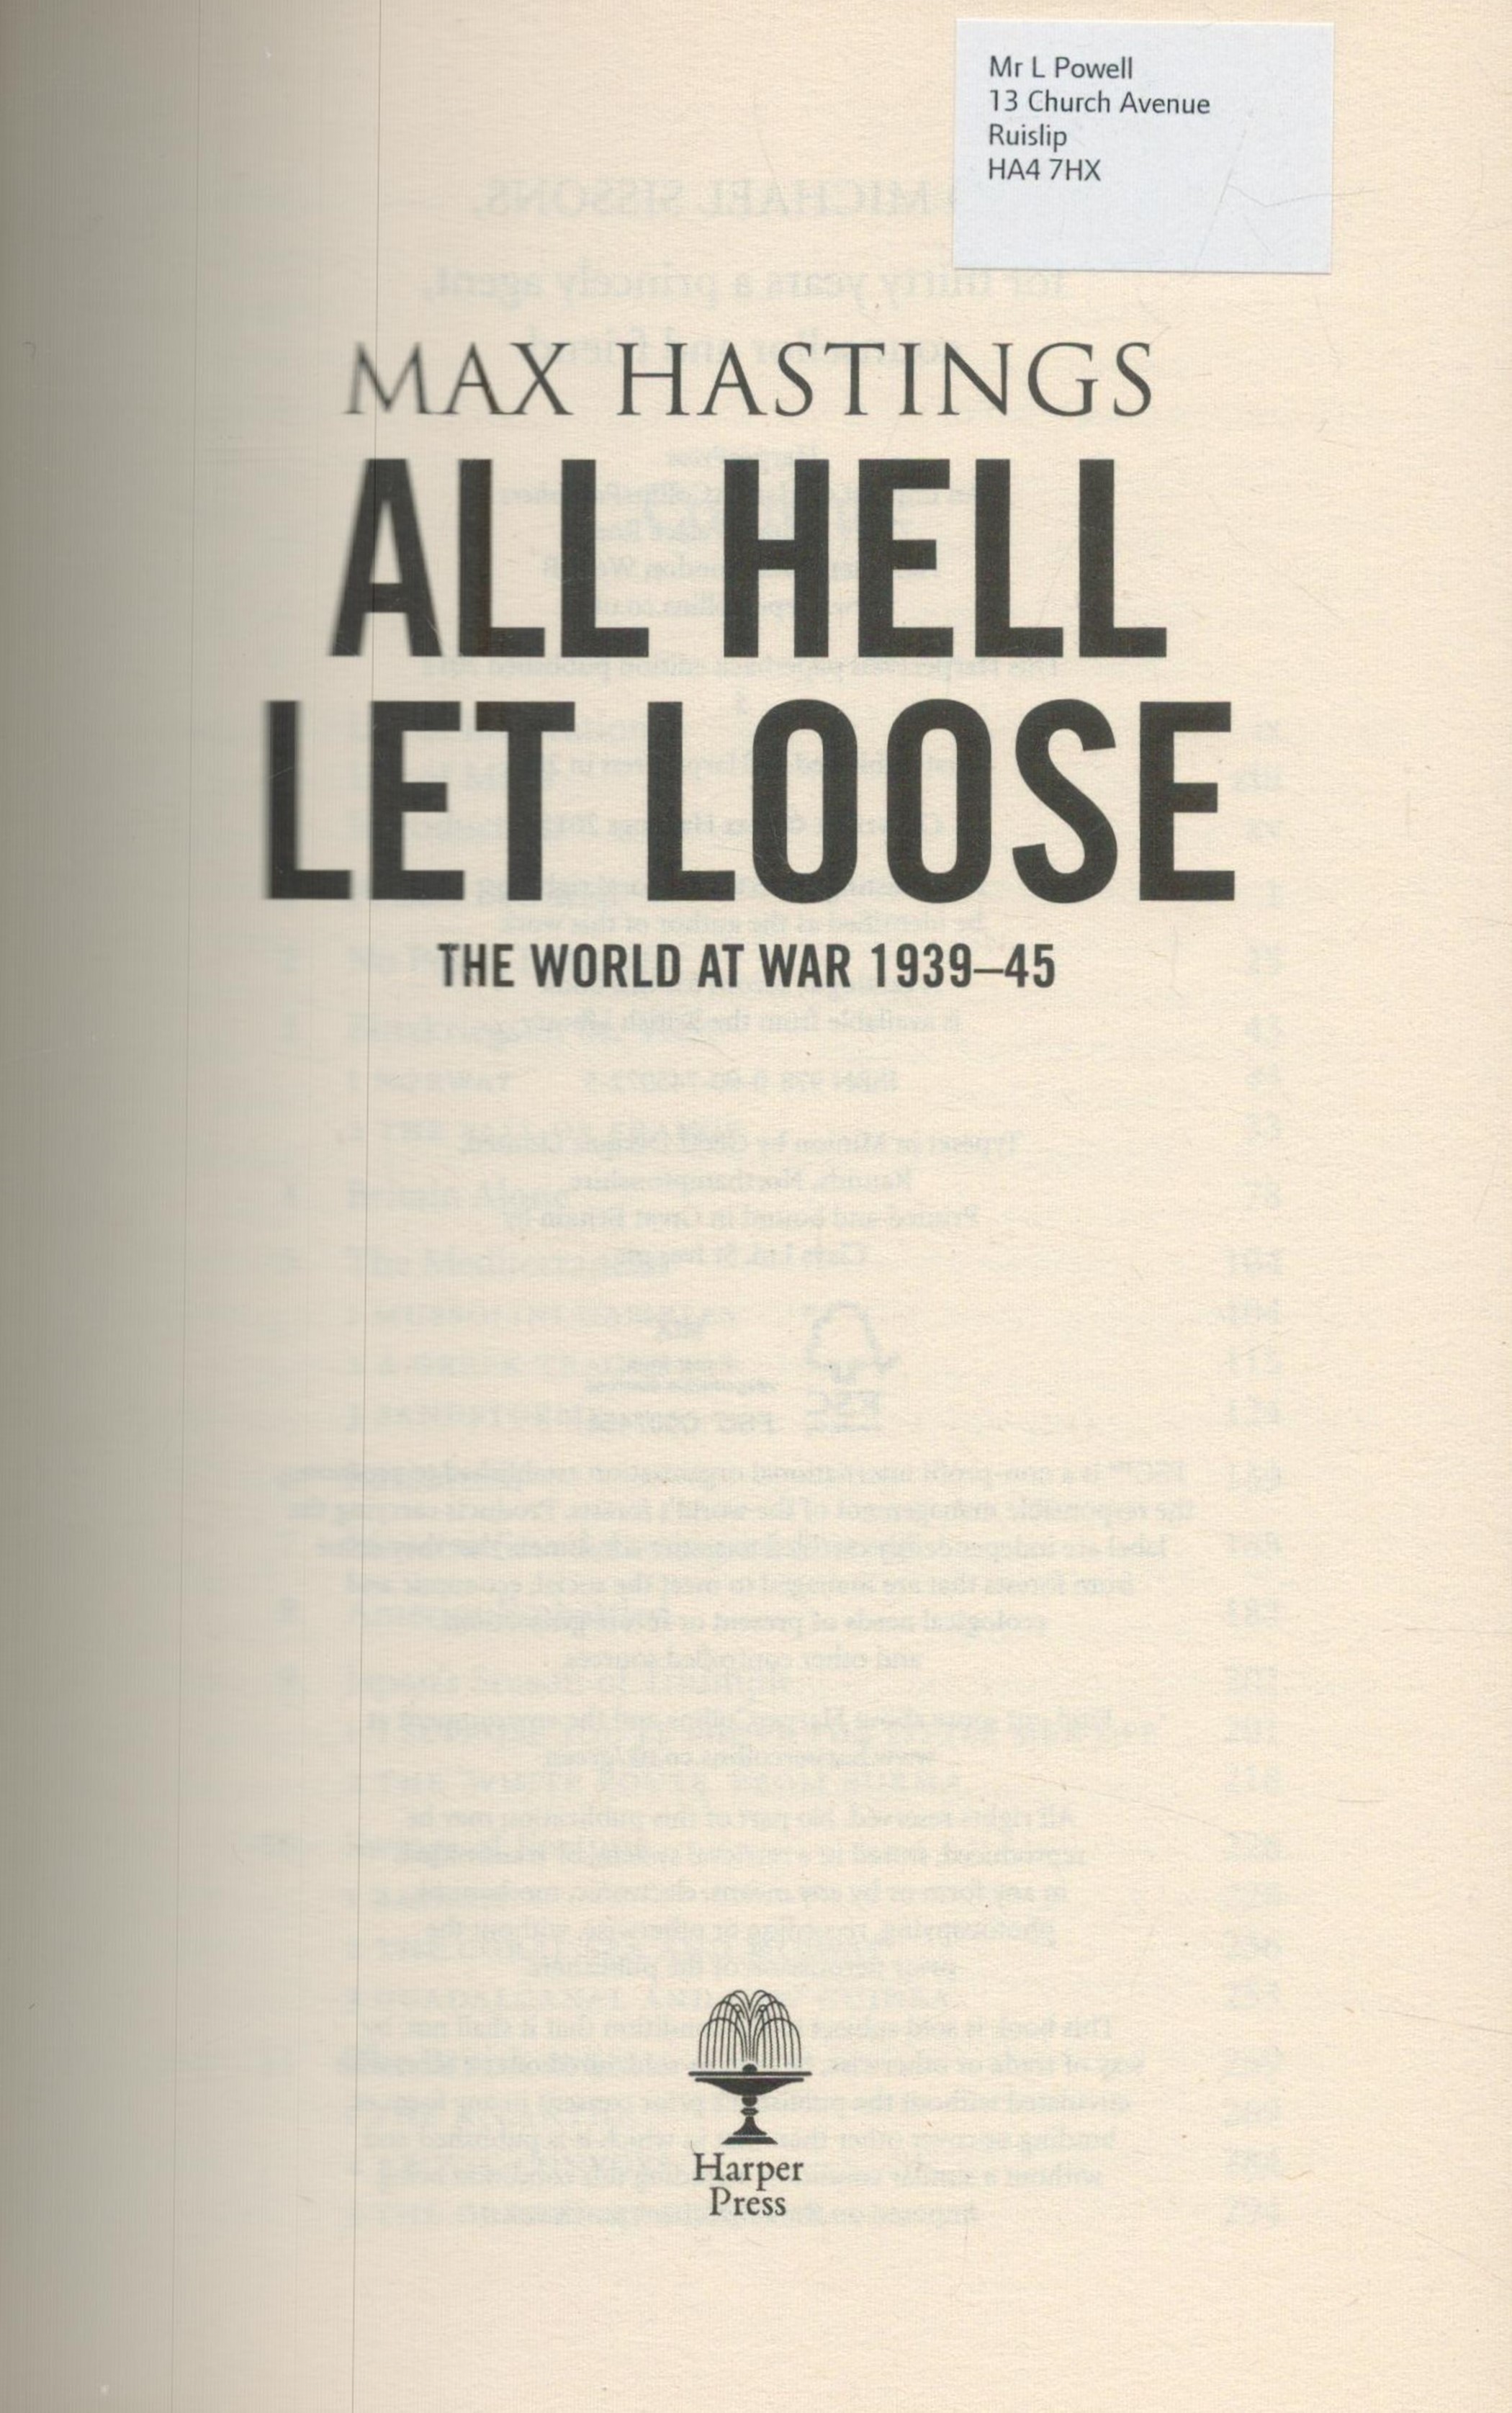 All Hell Let Loose - The World at War 1939-1945 by Max Hastings 2012 Softback Book with 748 pages - Image 6 of 9